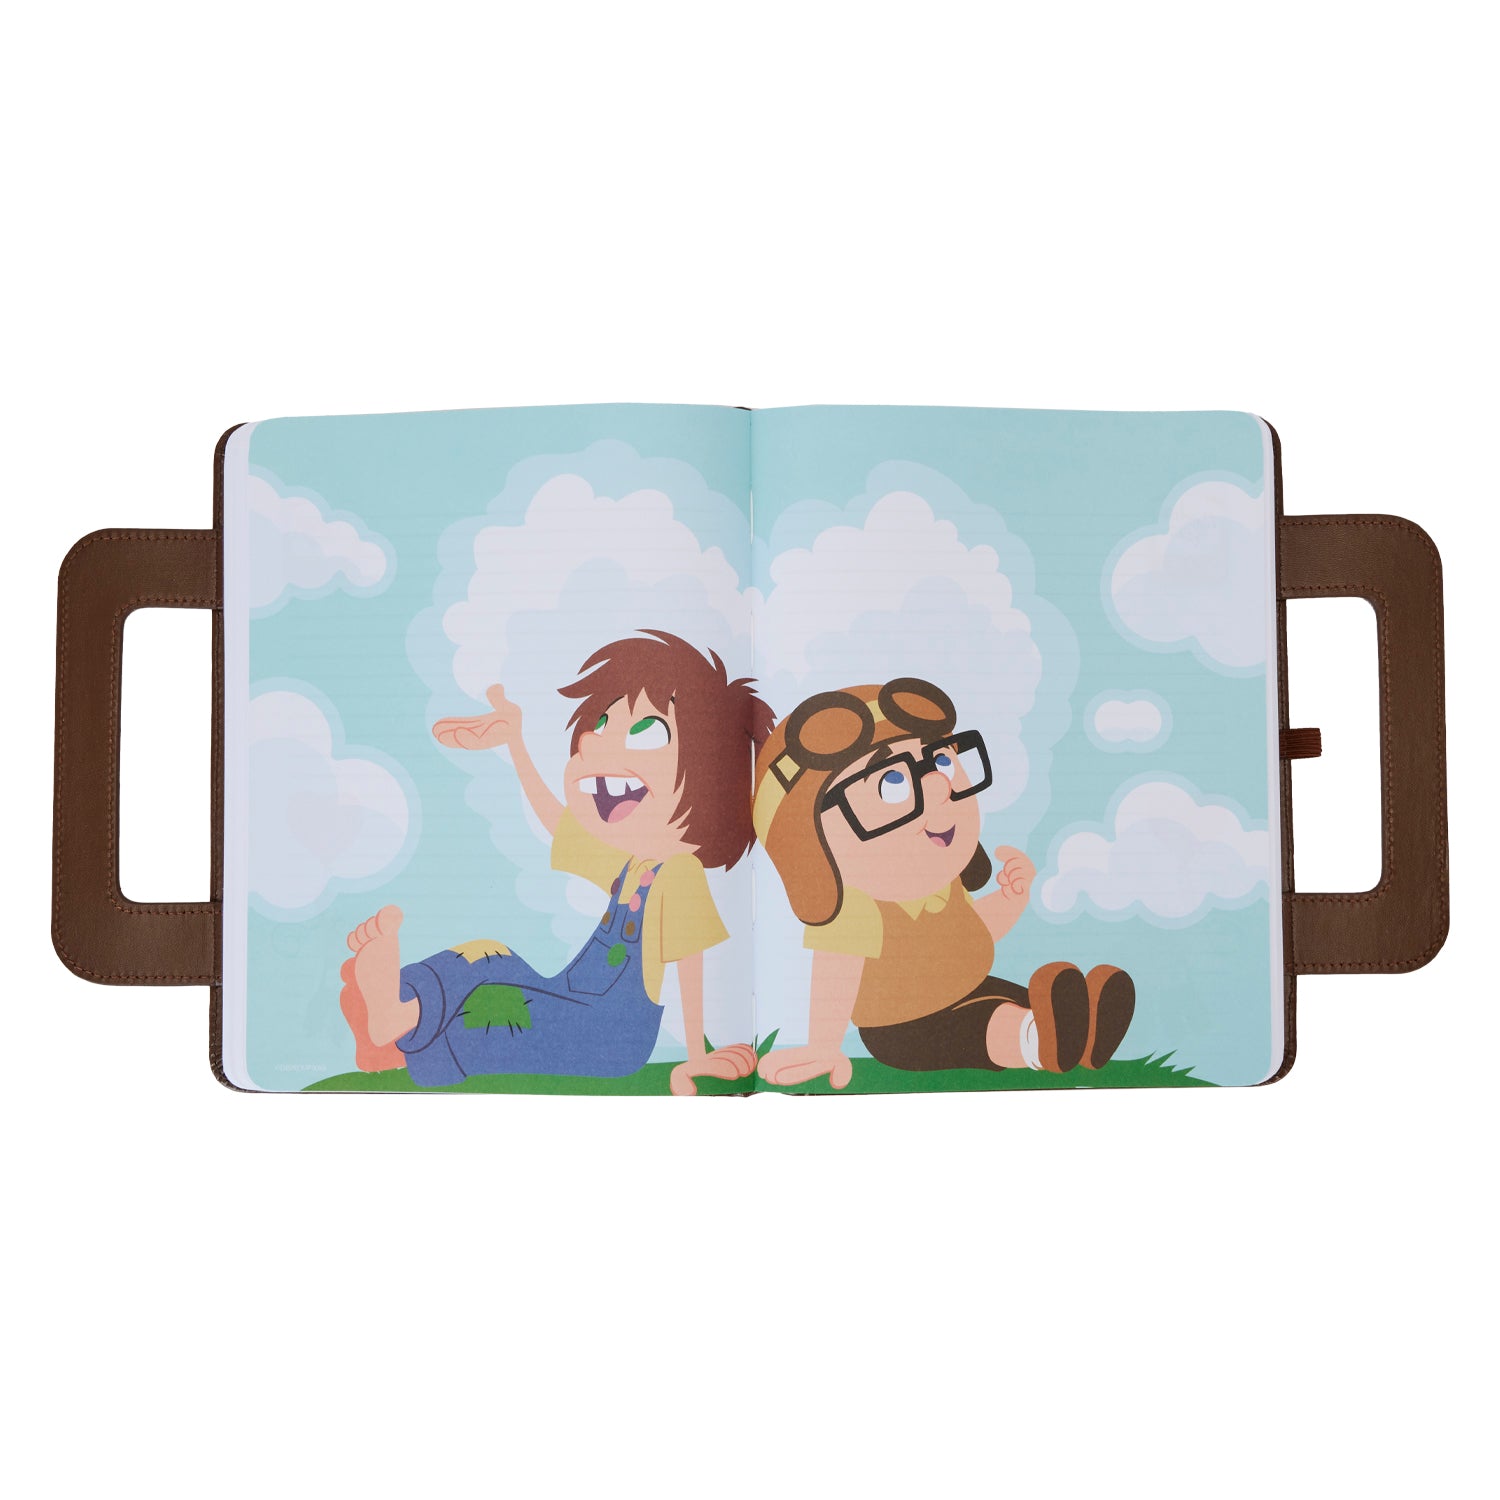 Loungefly Pixar Up 15th Anniversary Adventure Book Lunchbox Journal